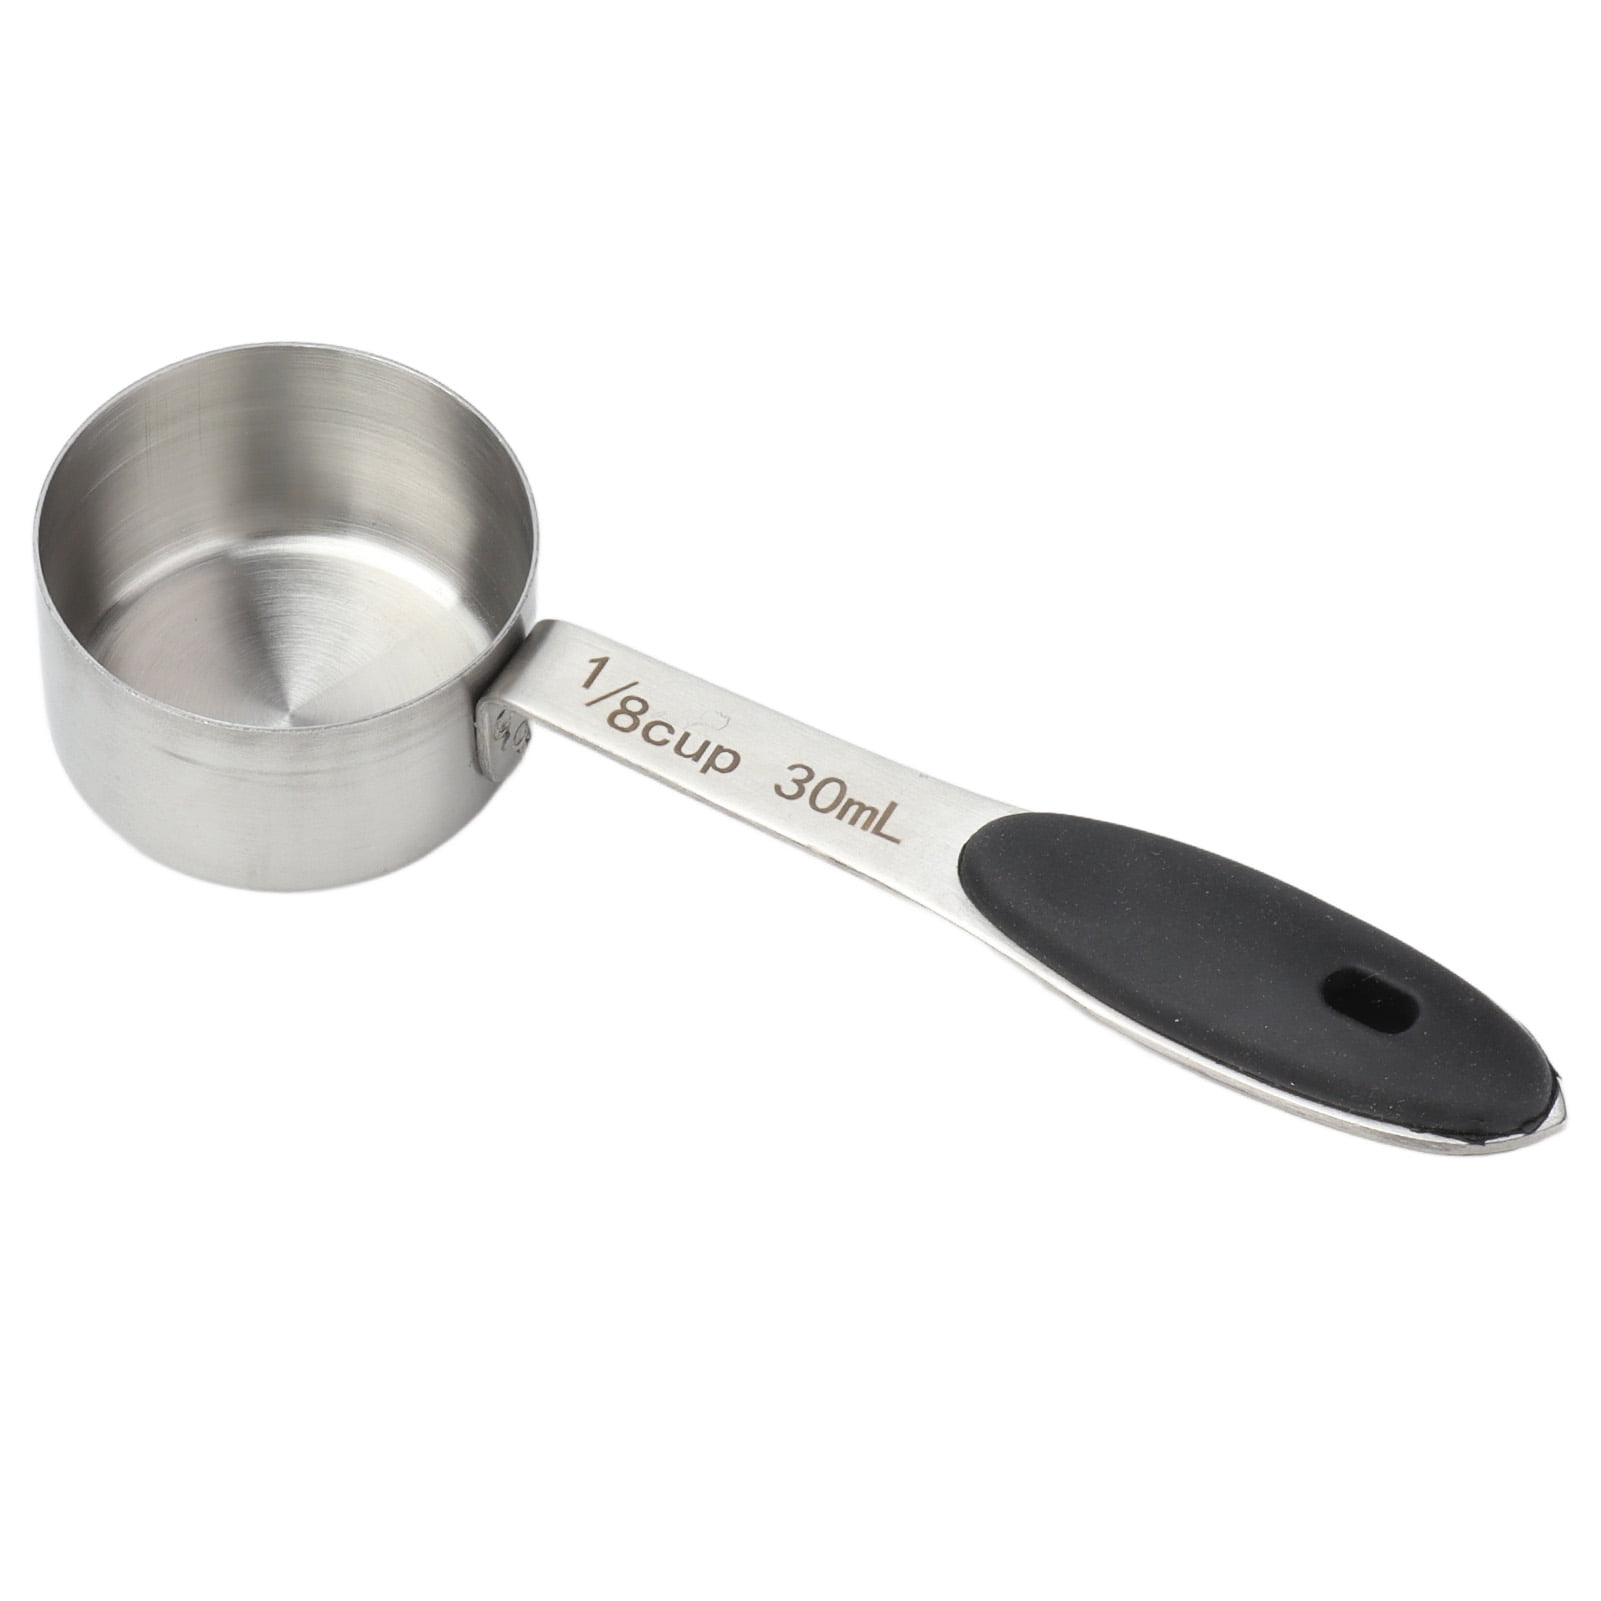 3pc STAINLESS STEEL ALAZCO COFFEE MEASURING SCOOP 1/8 CUP